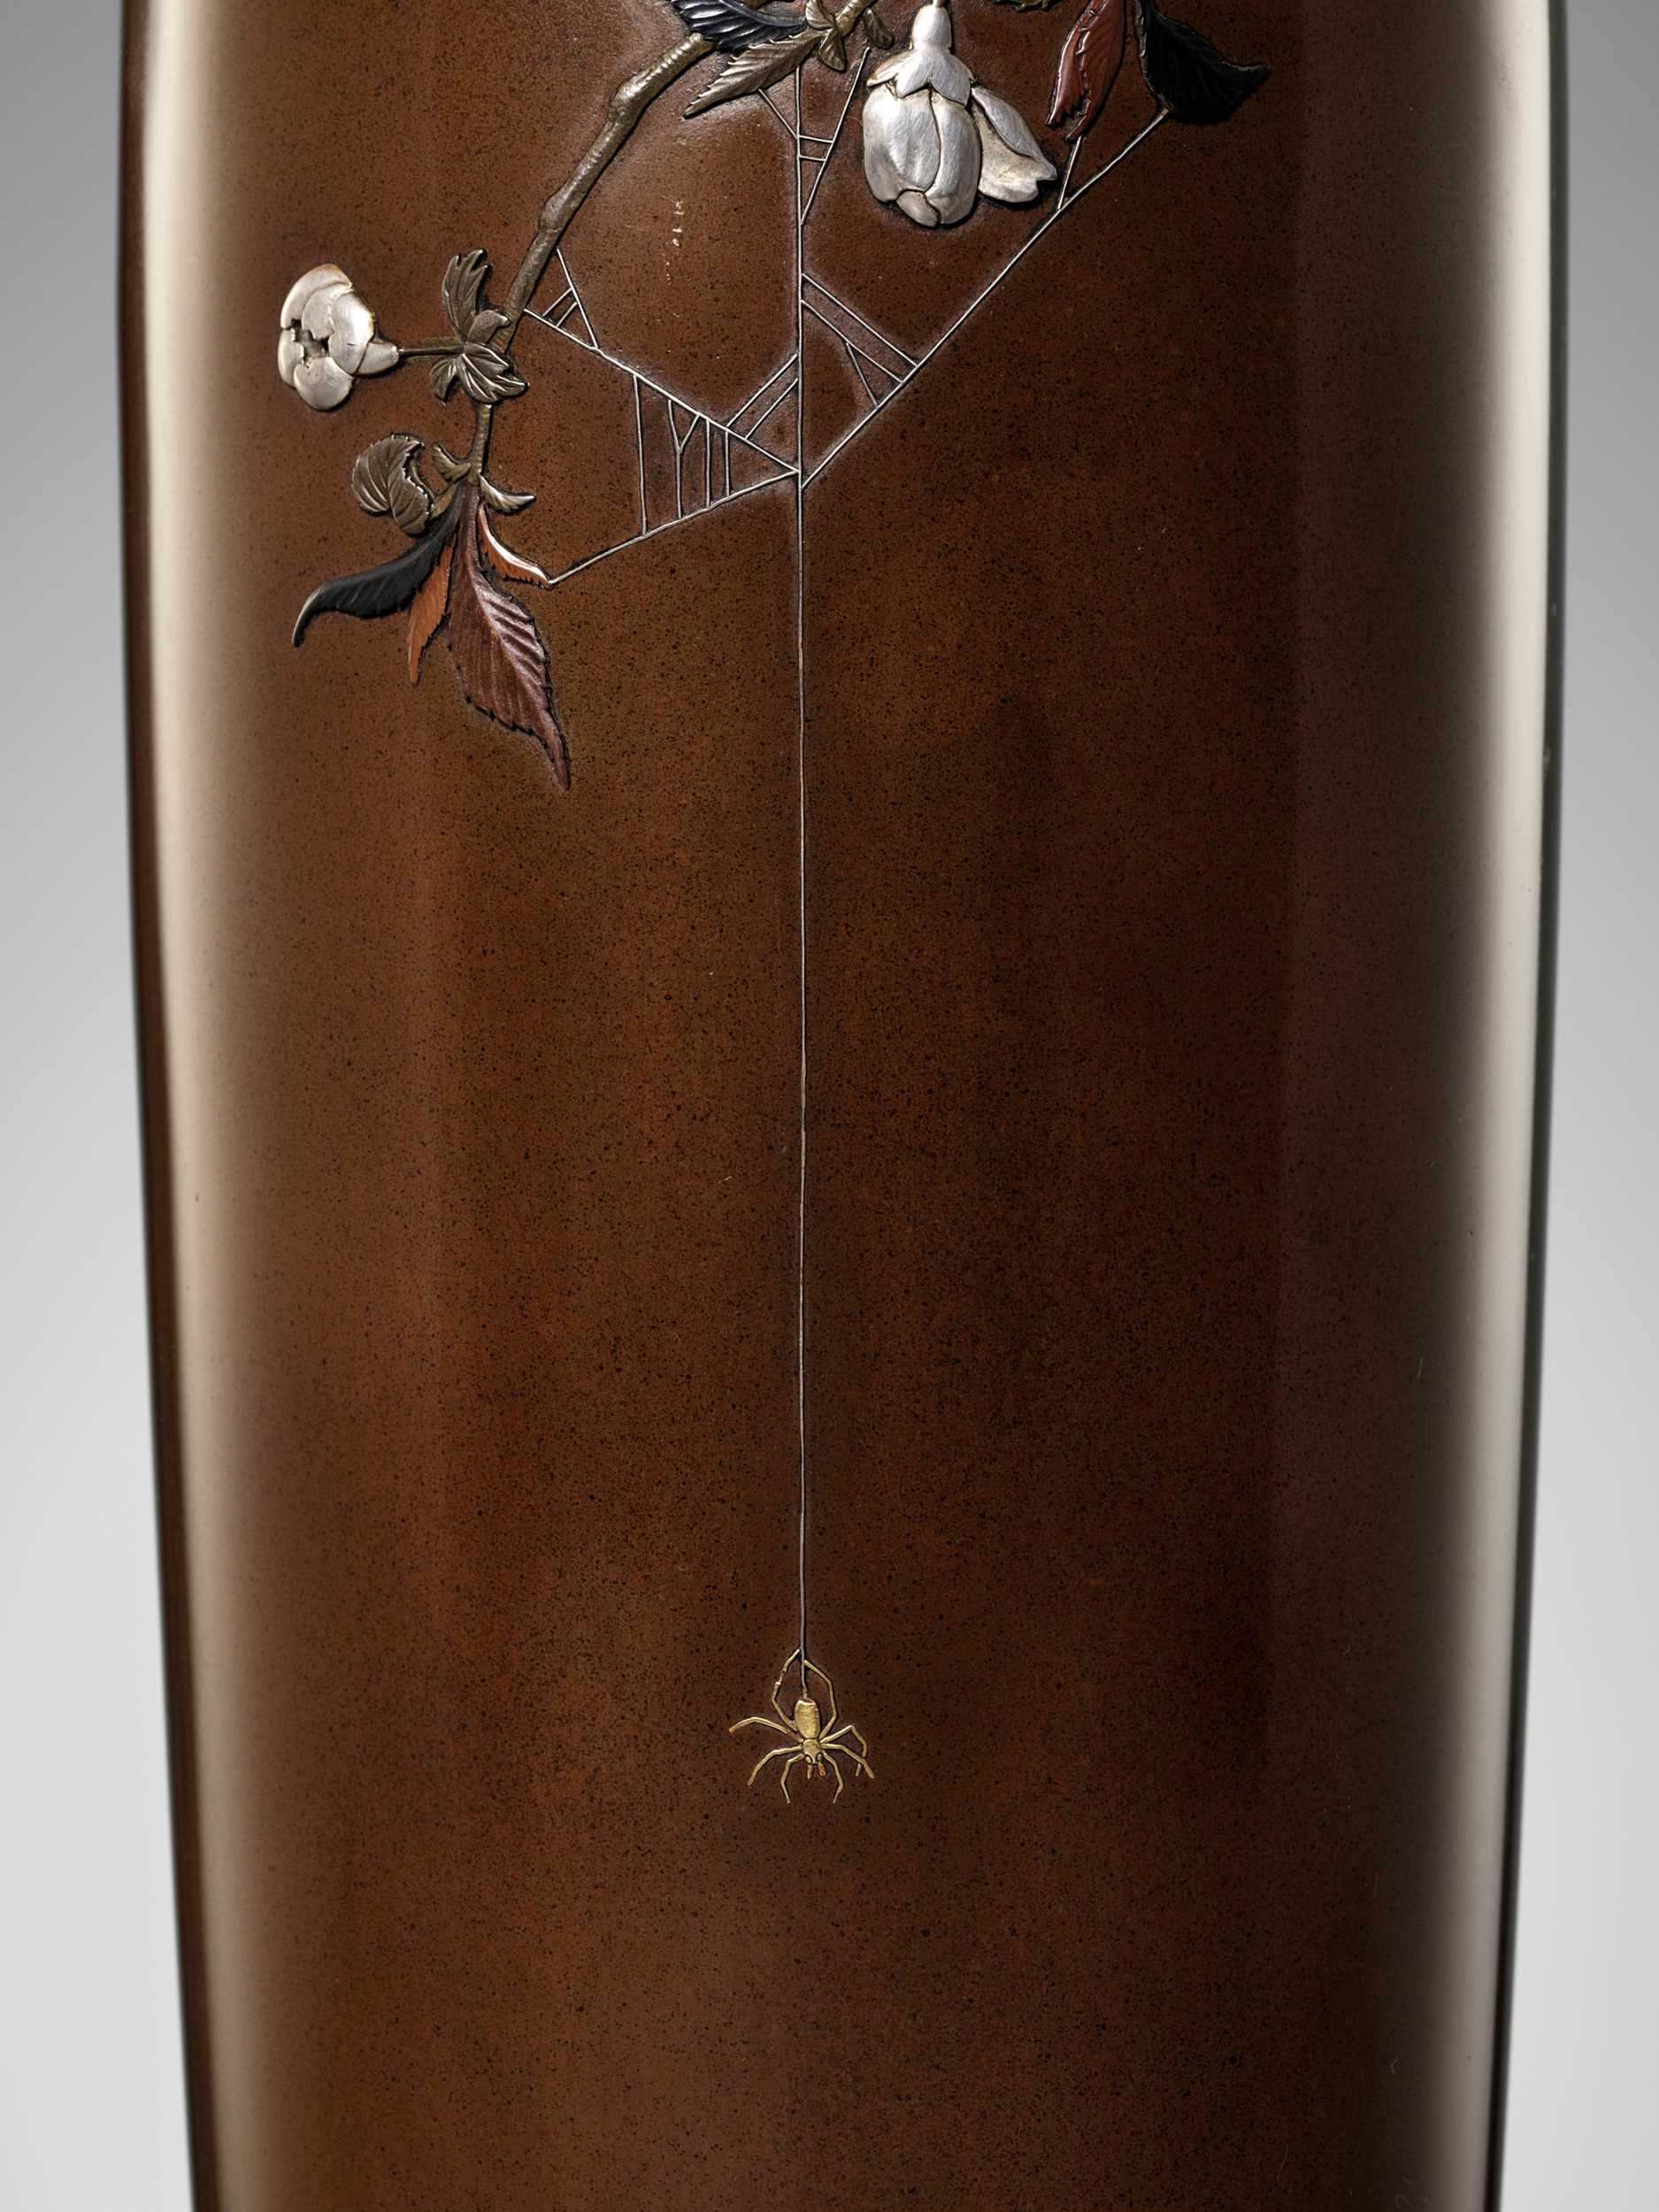 Lot 62 - OTSUEI FOR THE NOGAWA COMPANY: A MASTERFUL INLAID BRONZE VASE DEPICTING A SPIDER HANGING FROM A PLUM BRANCH